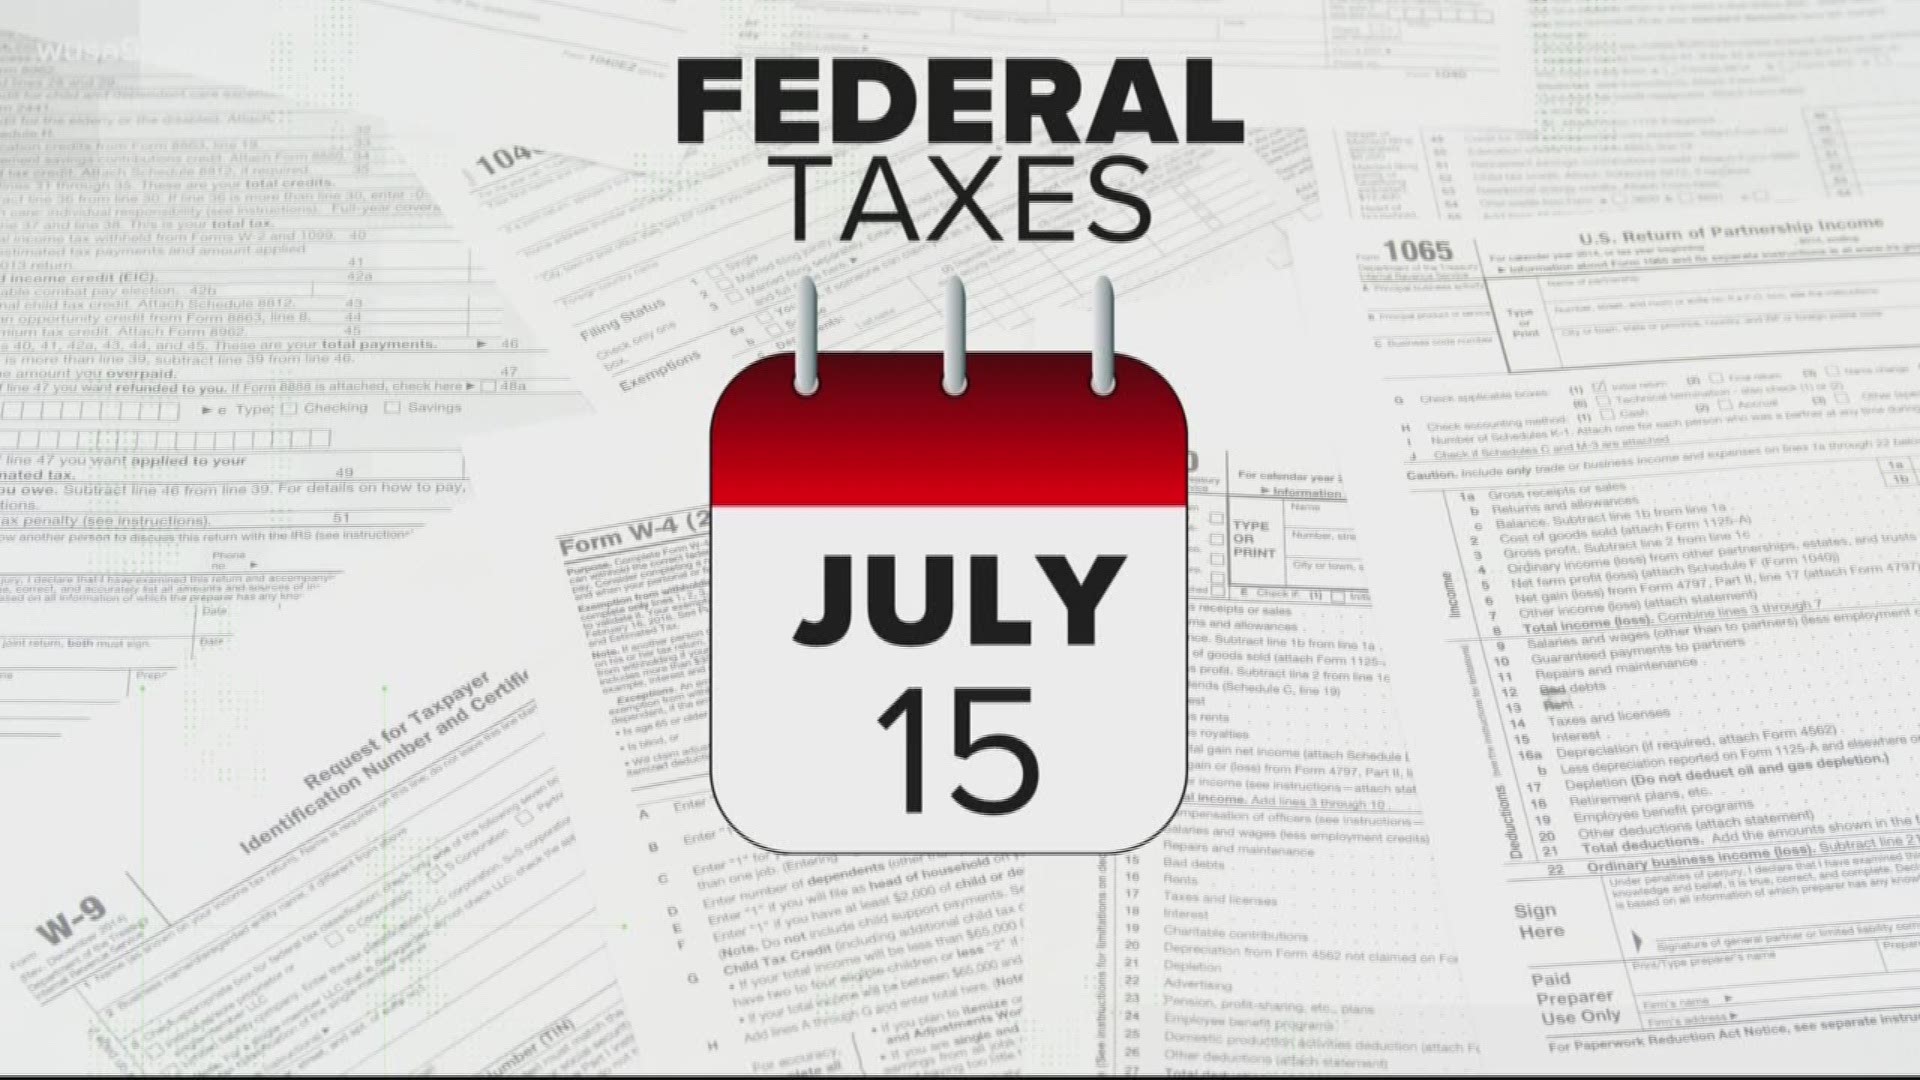 WUSA9's VERIFY team looks at the new tax filing extension that was put in place by the IRS because of the coronavirus pandemic.